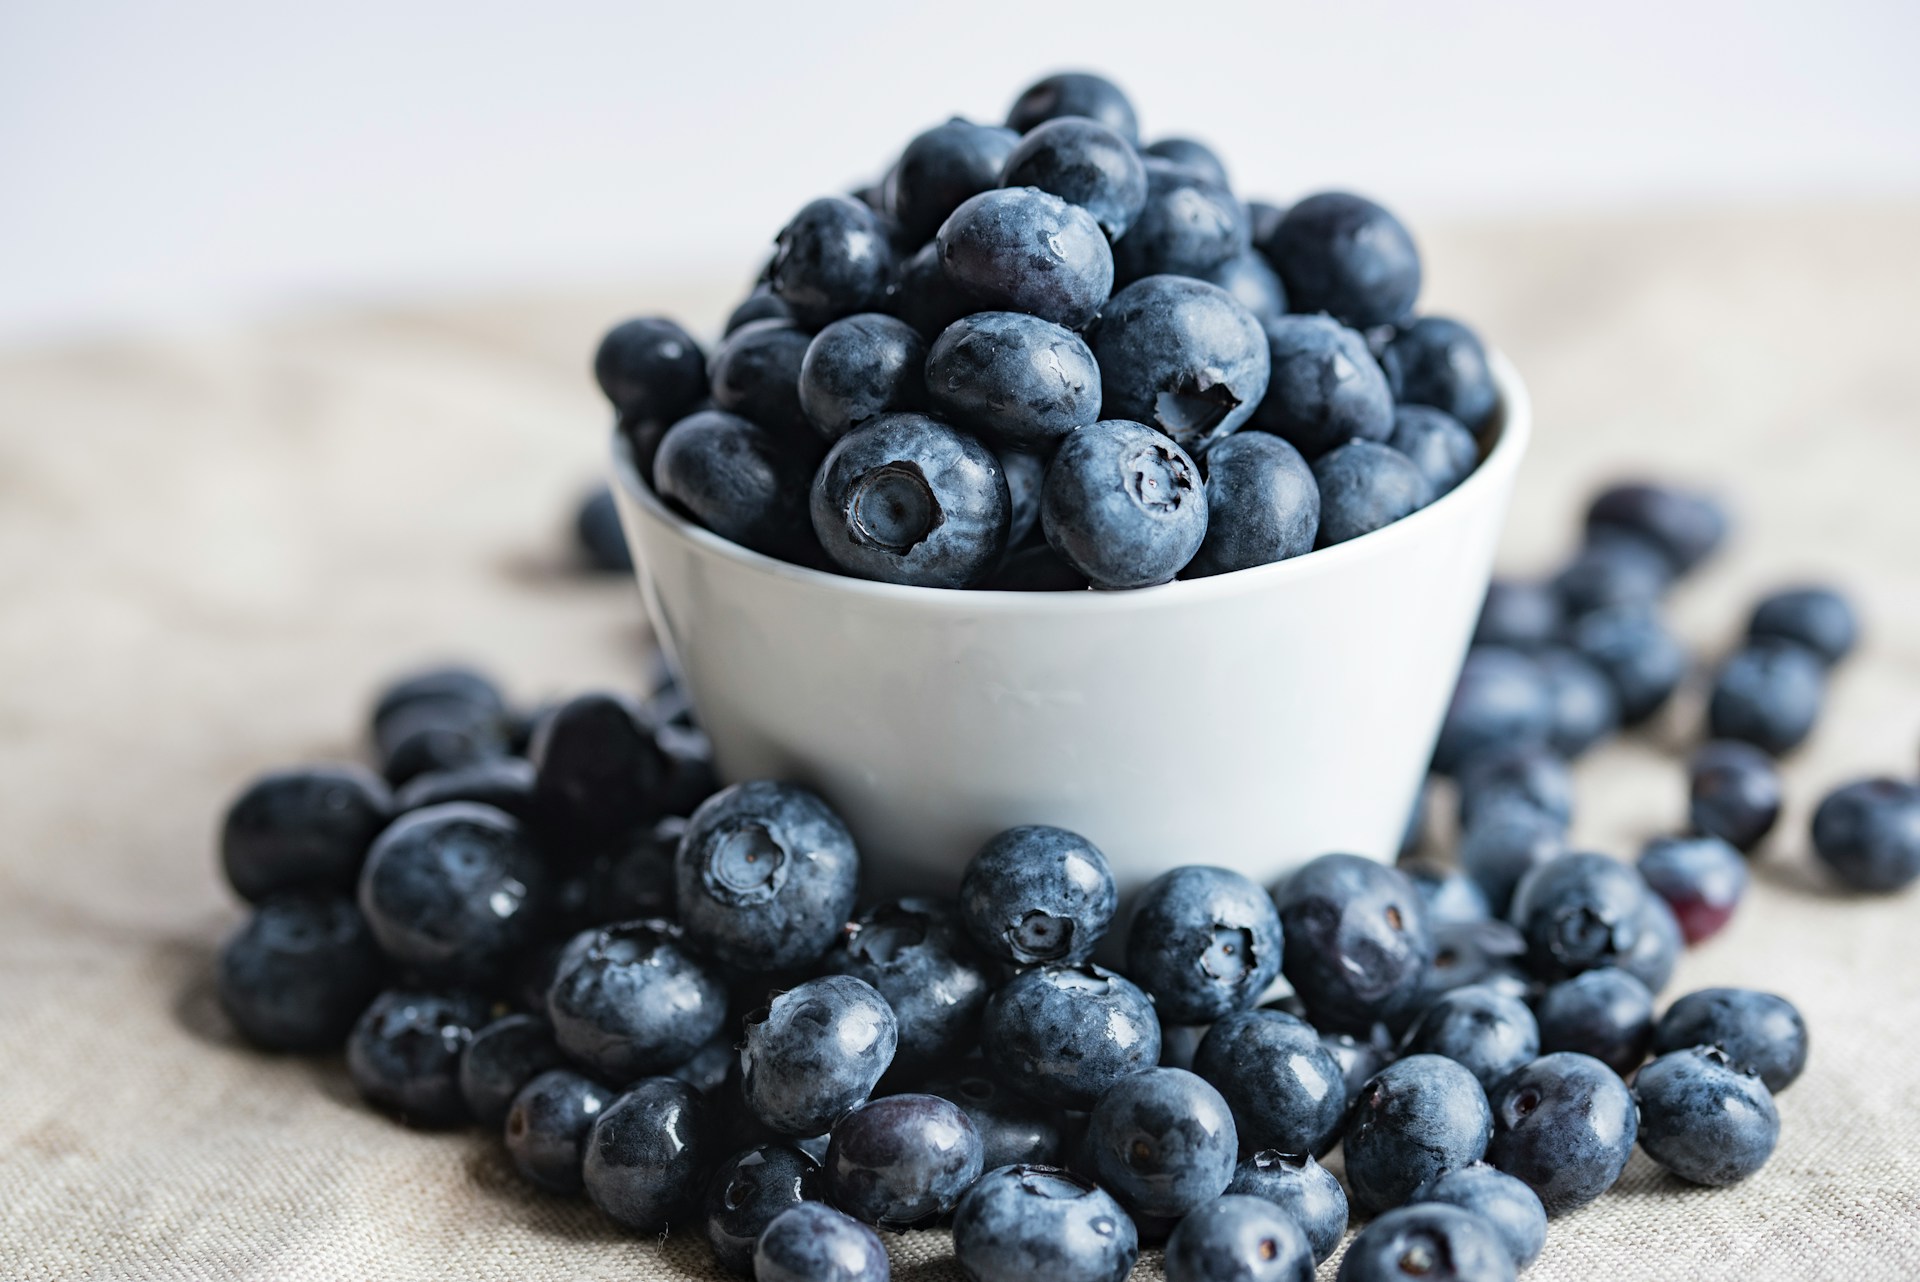 Fun Facts About Blueberries!